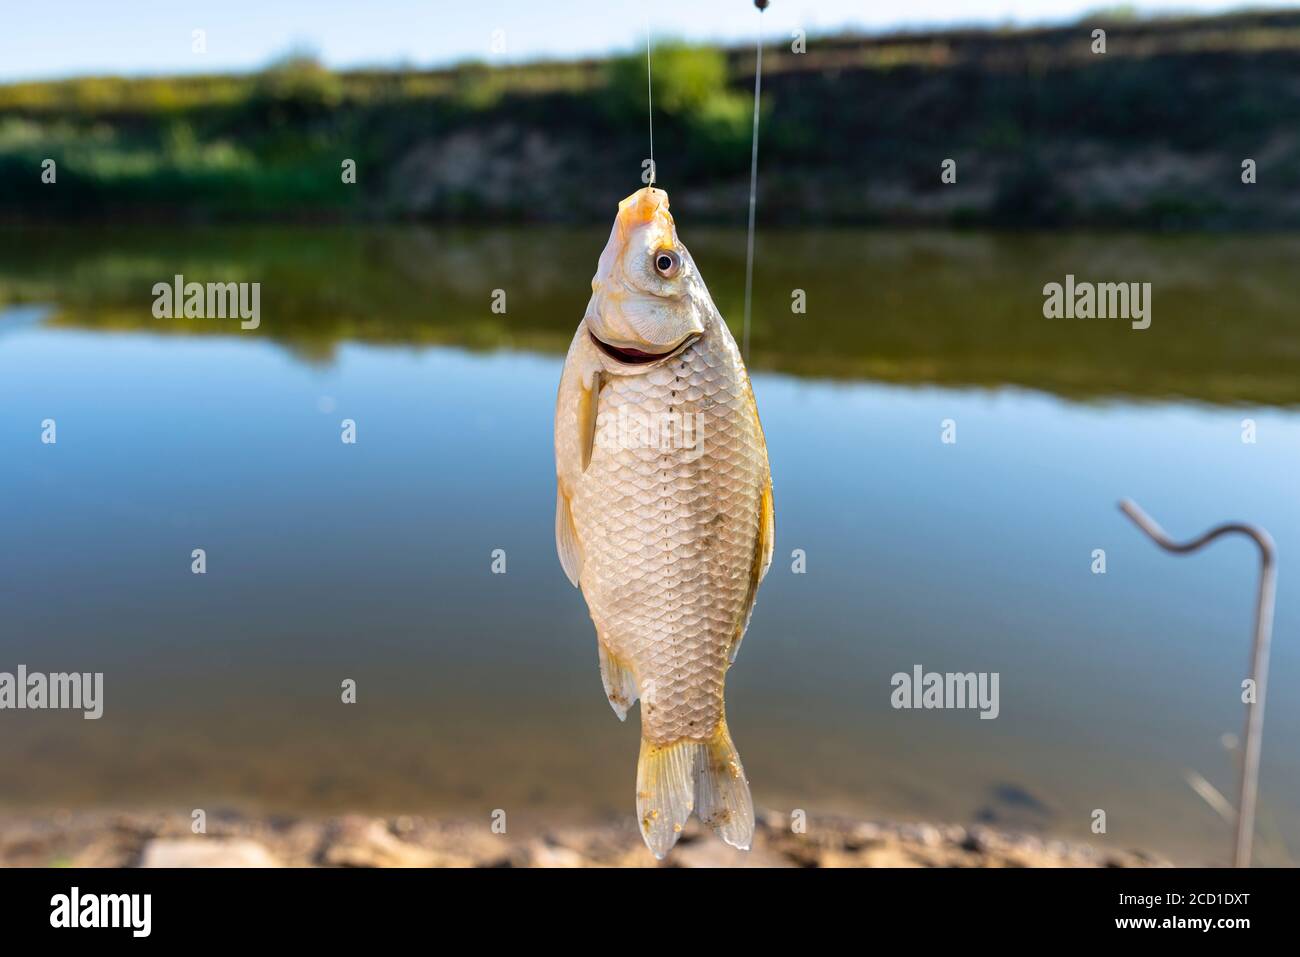 https://c8.alamy.com/comp/2CD1DXT/crucian-fish-caught-on-bait-by-the-lake-hanging-on-a-hook-on-a-fishing-rod-sunny-morning-2CD1DXT.jpg